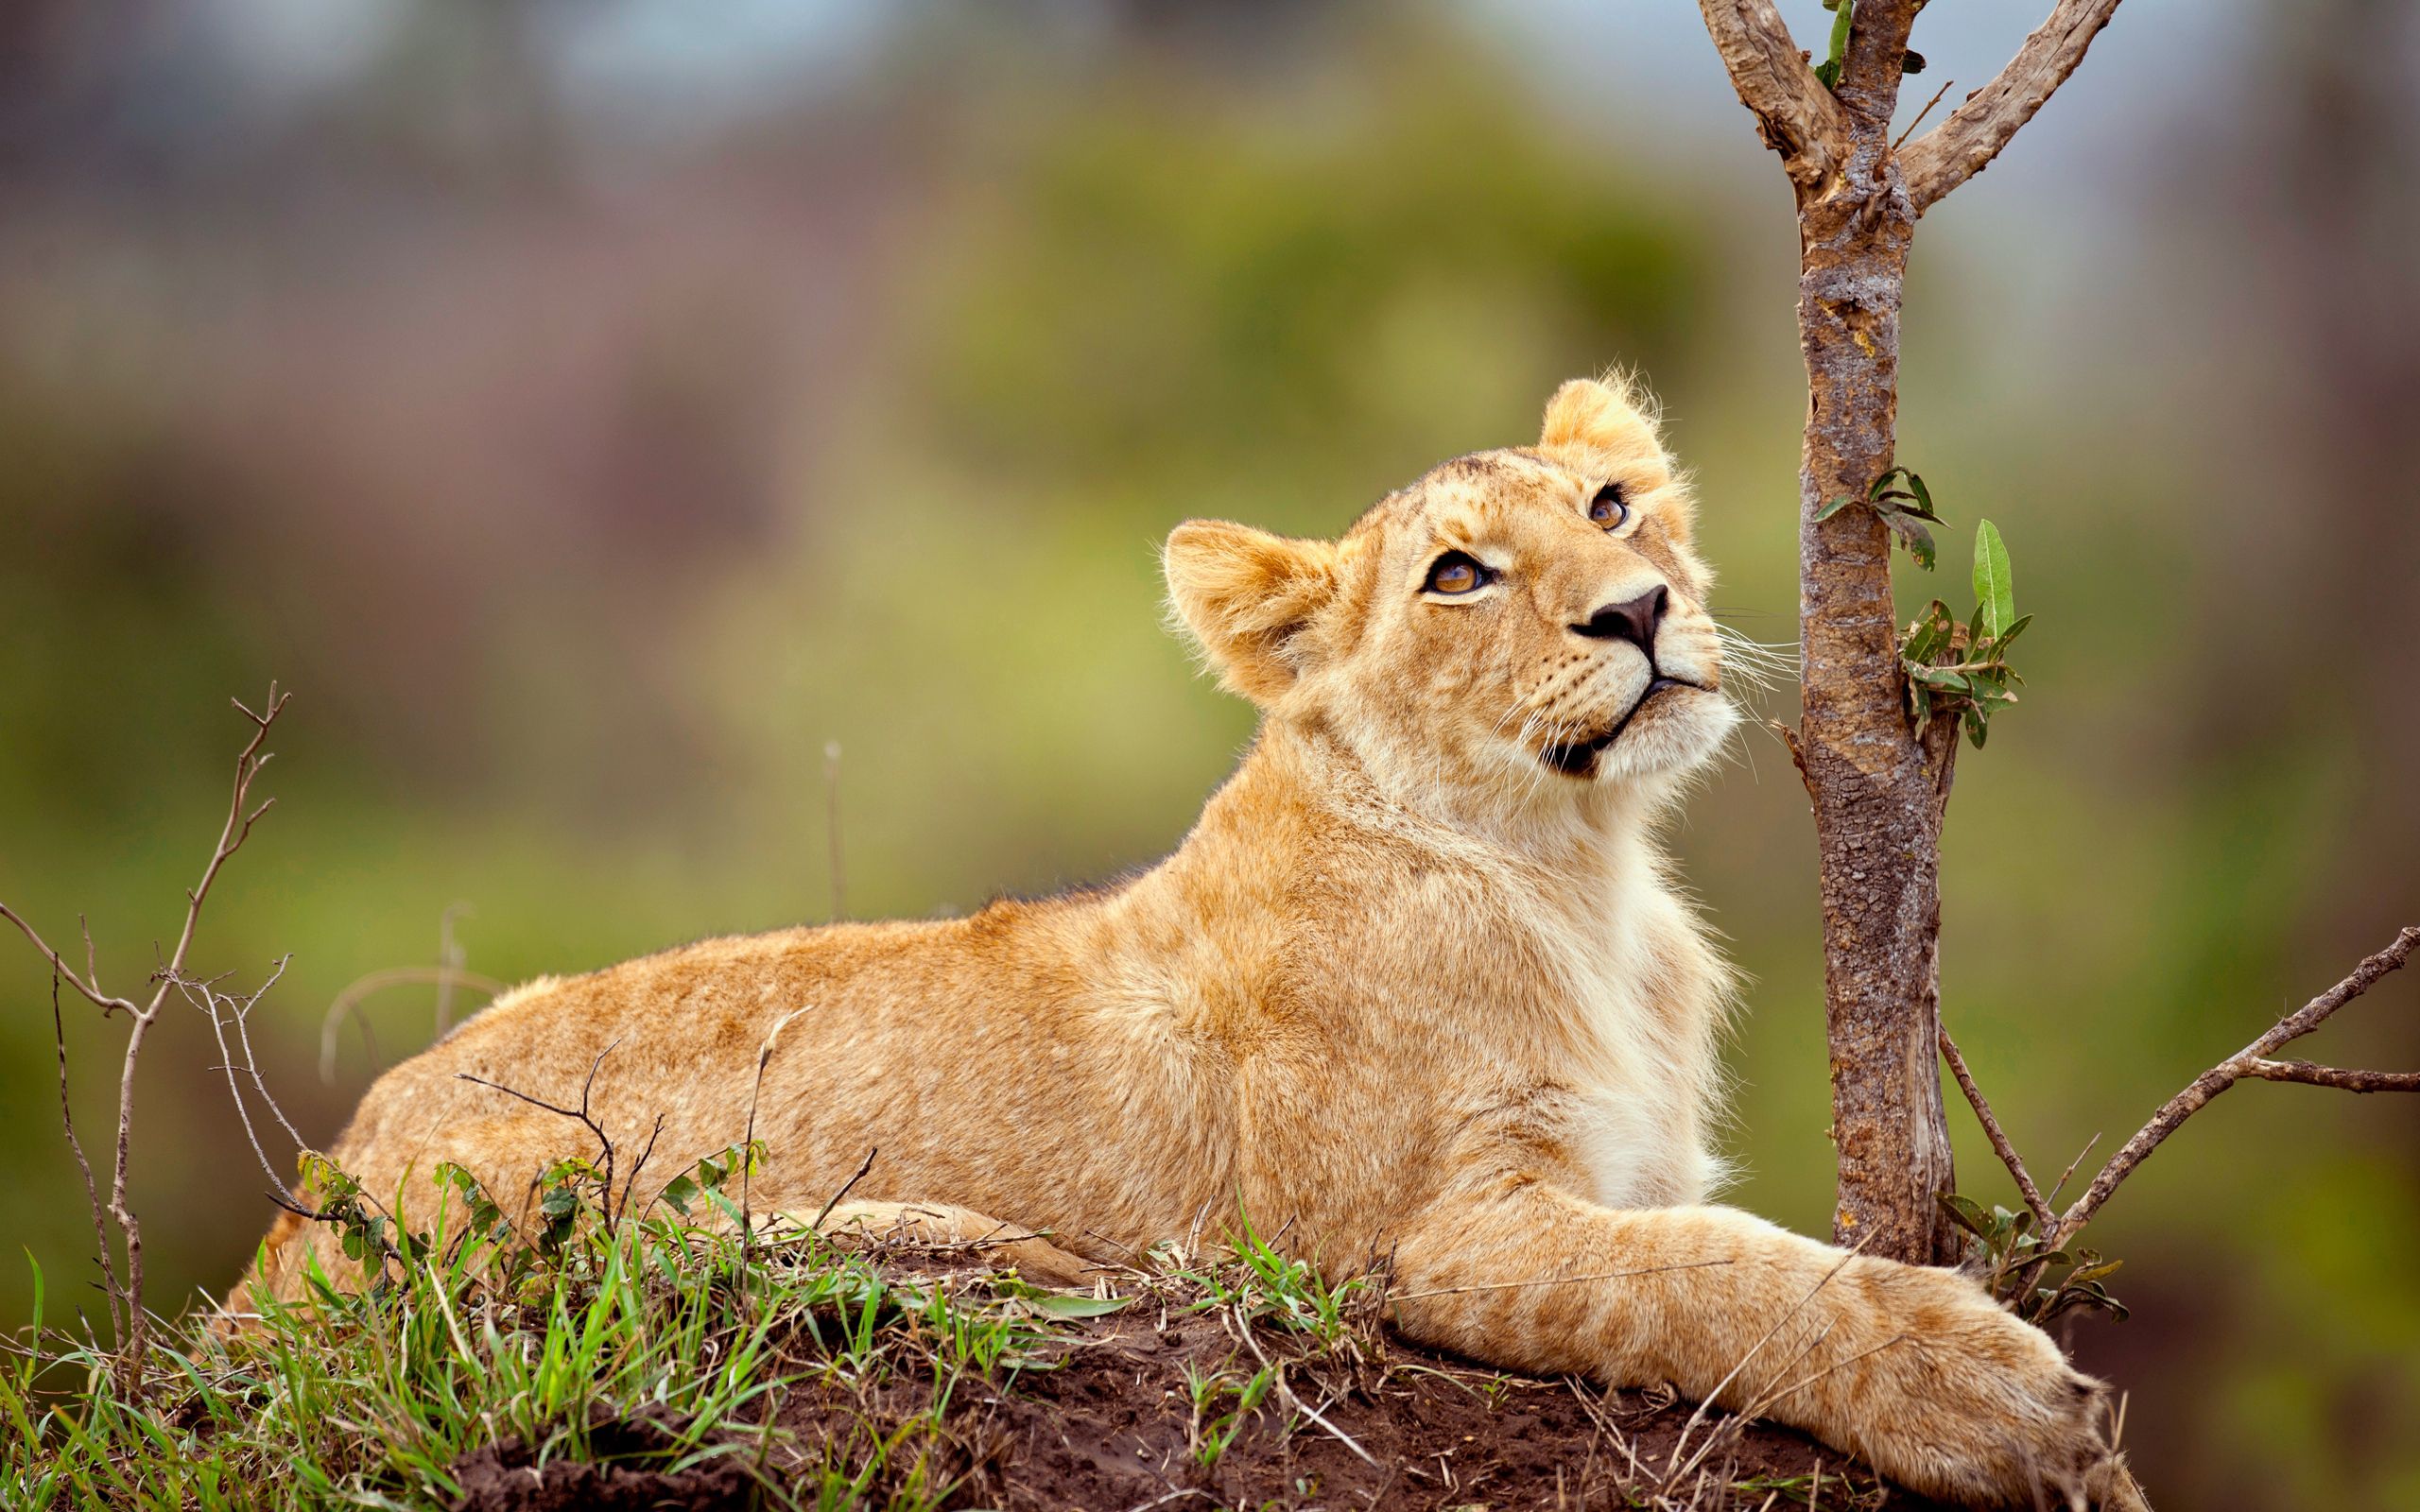 joey, animals, grass, young, to lie down, lie, branch, lion, lion cub